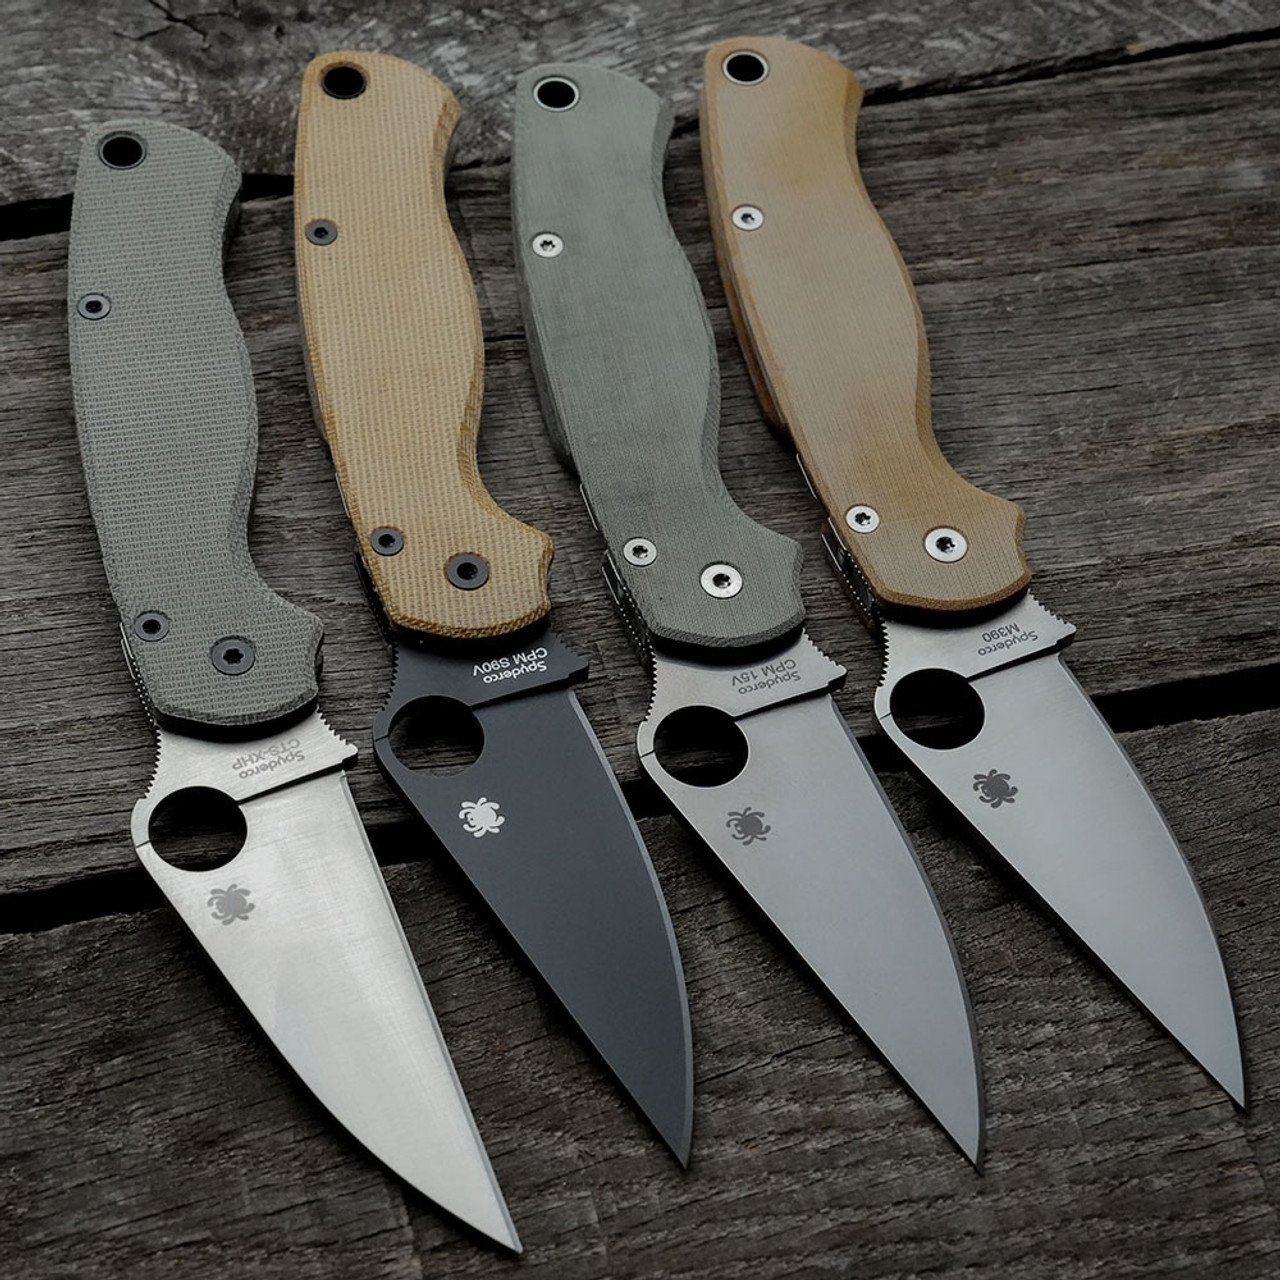 Who sells canvas micarta for the mini grip and 940?